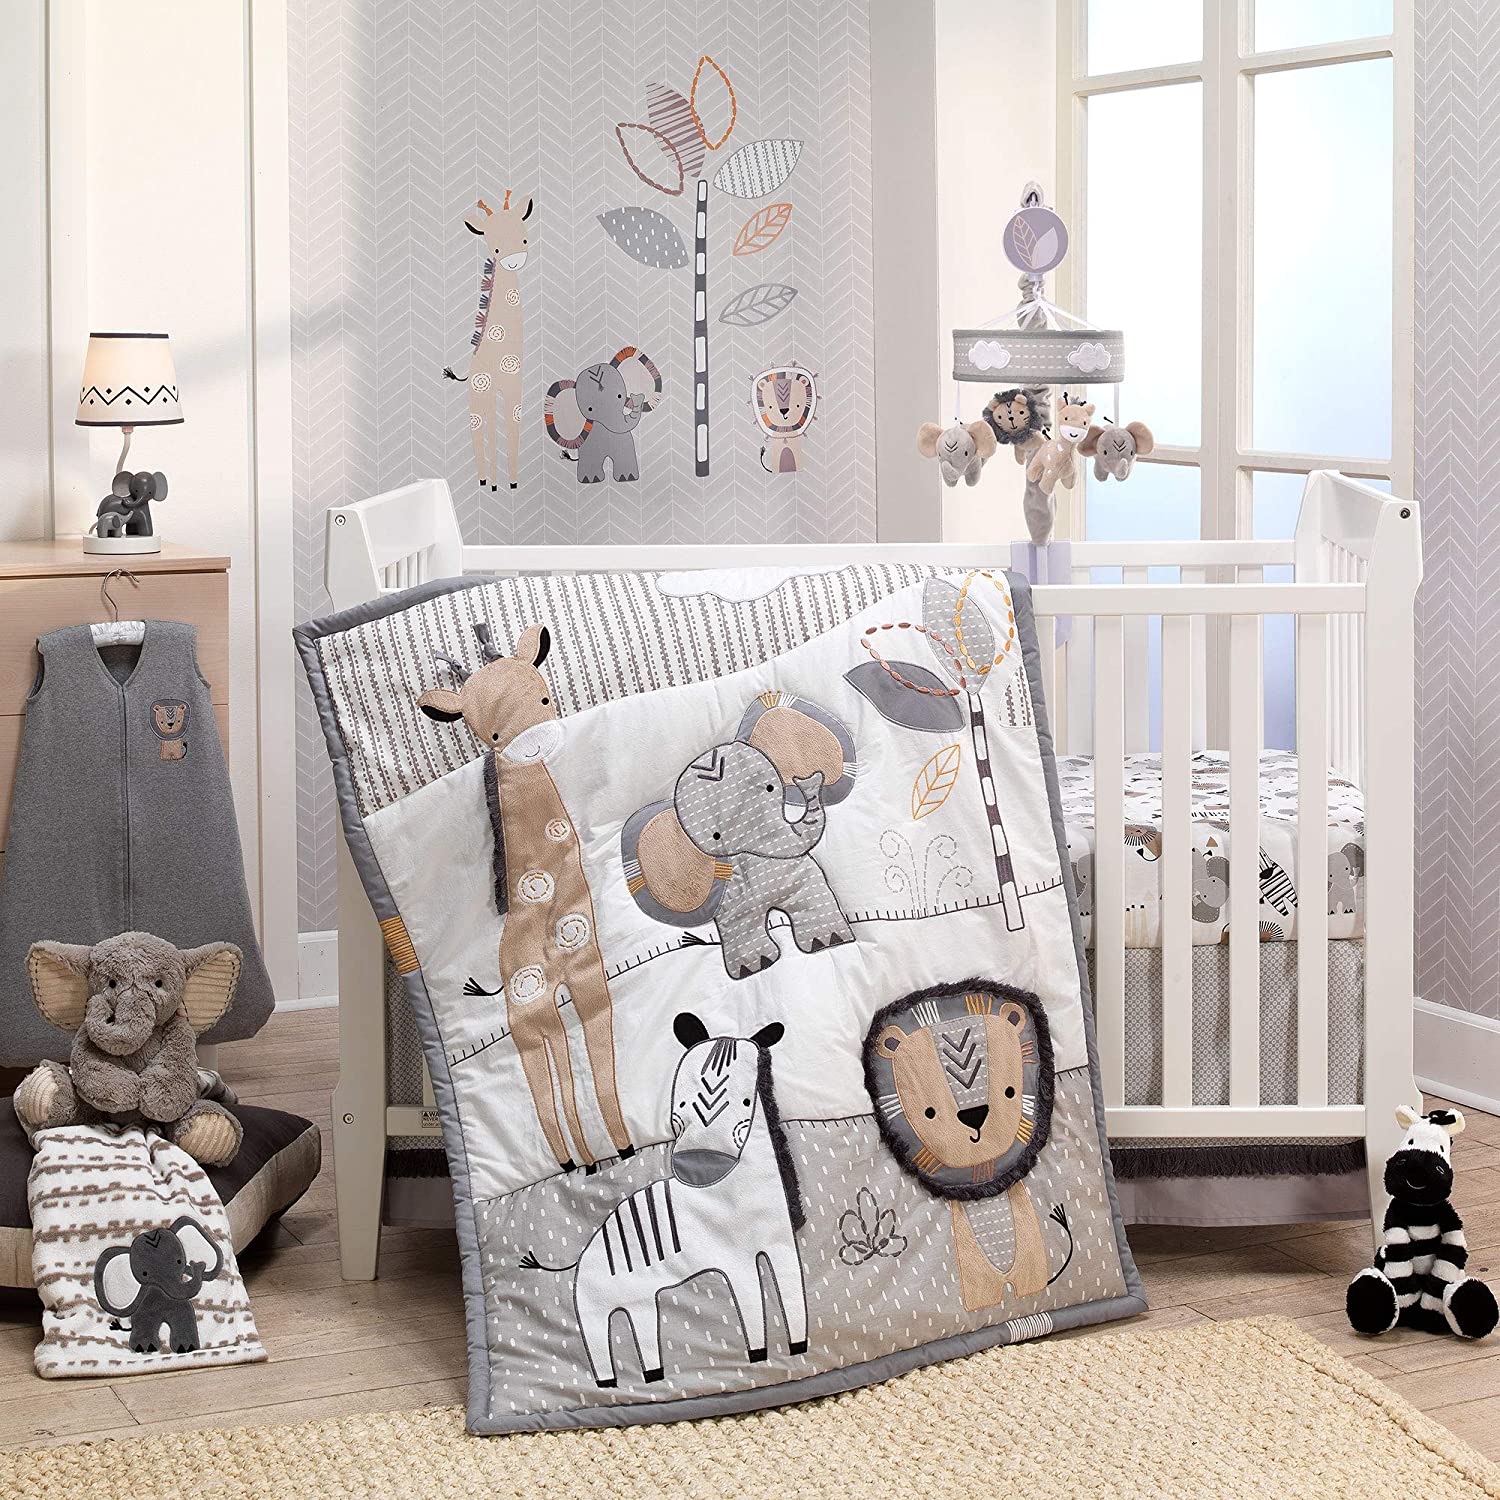 Lambs & Ivy Wall Decals & Wearable Blanket Crib Comforter Set For Boys, 6-Piece